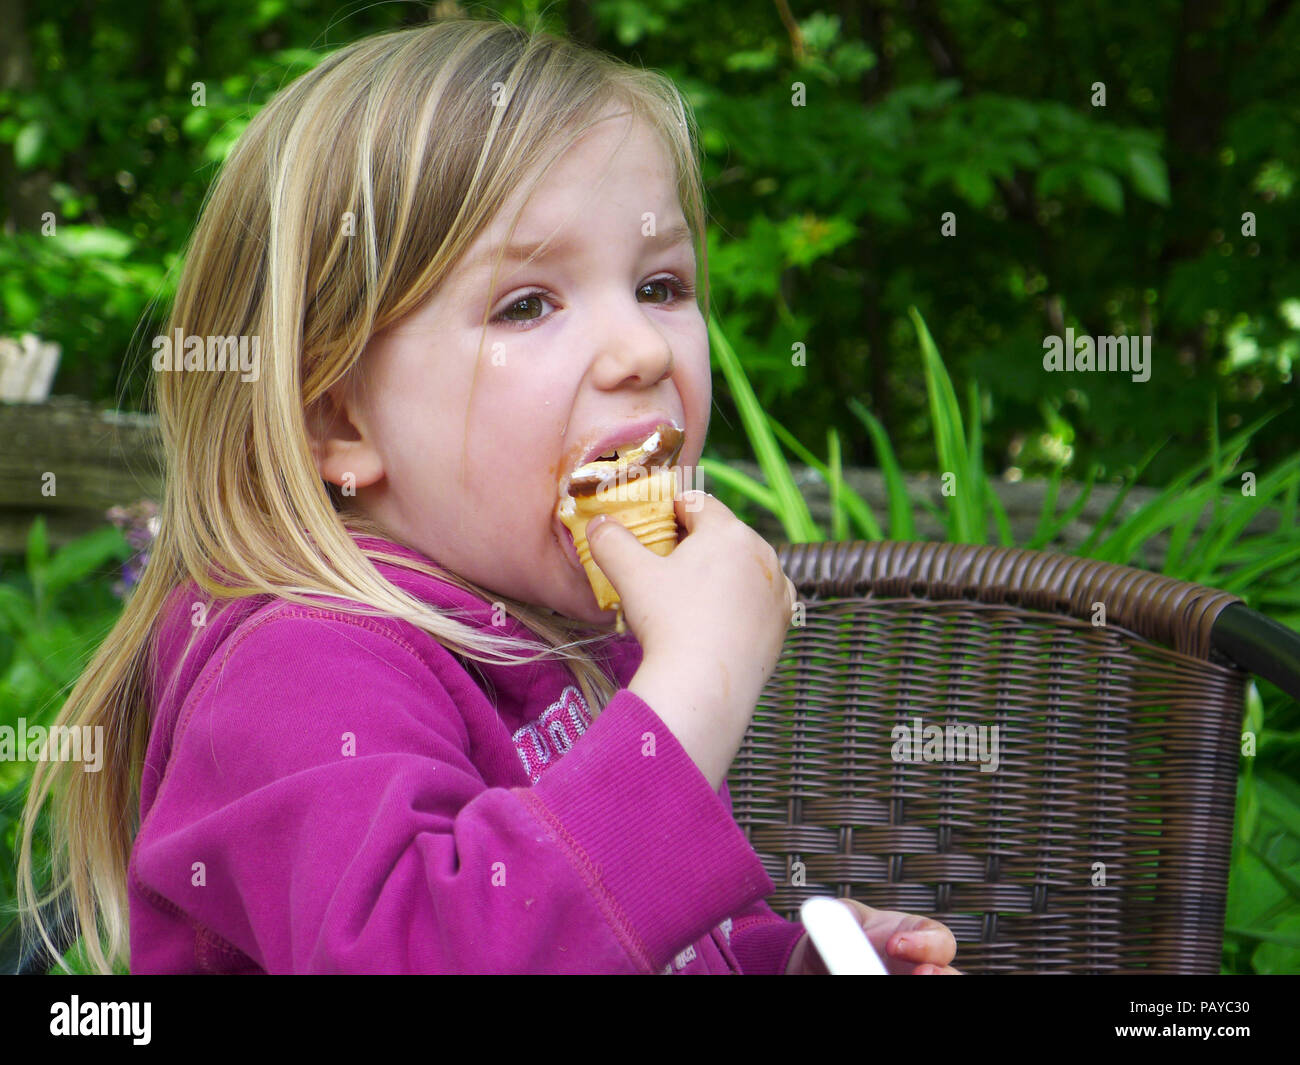 A little girl (3 yr old) eating an ice cream Stock Photo